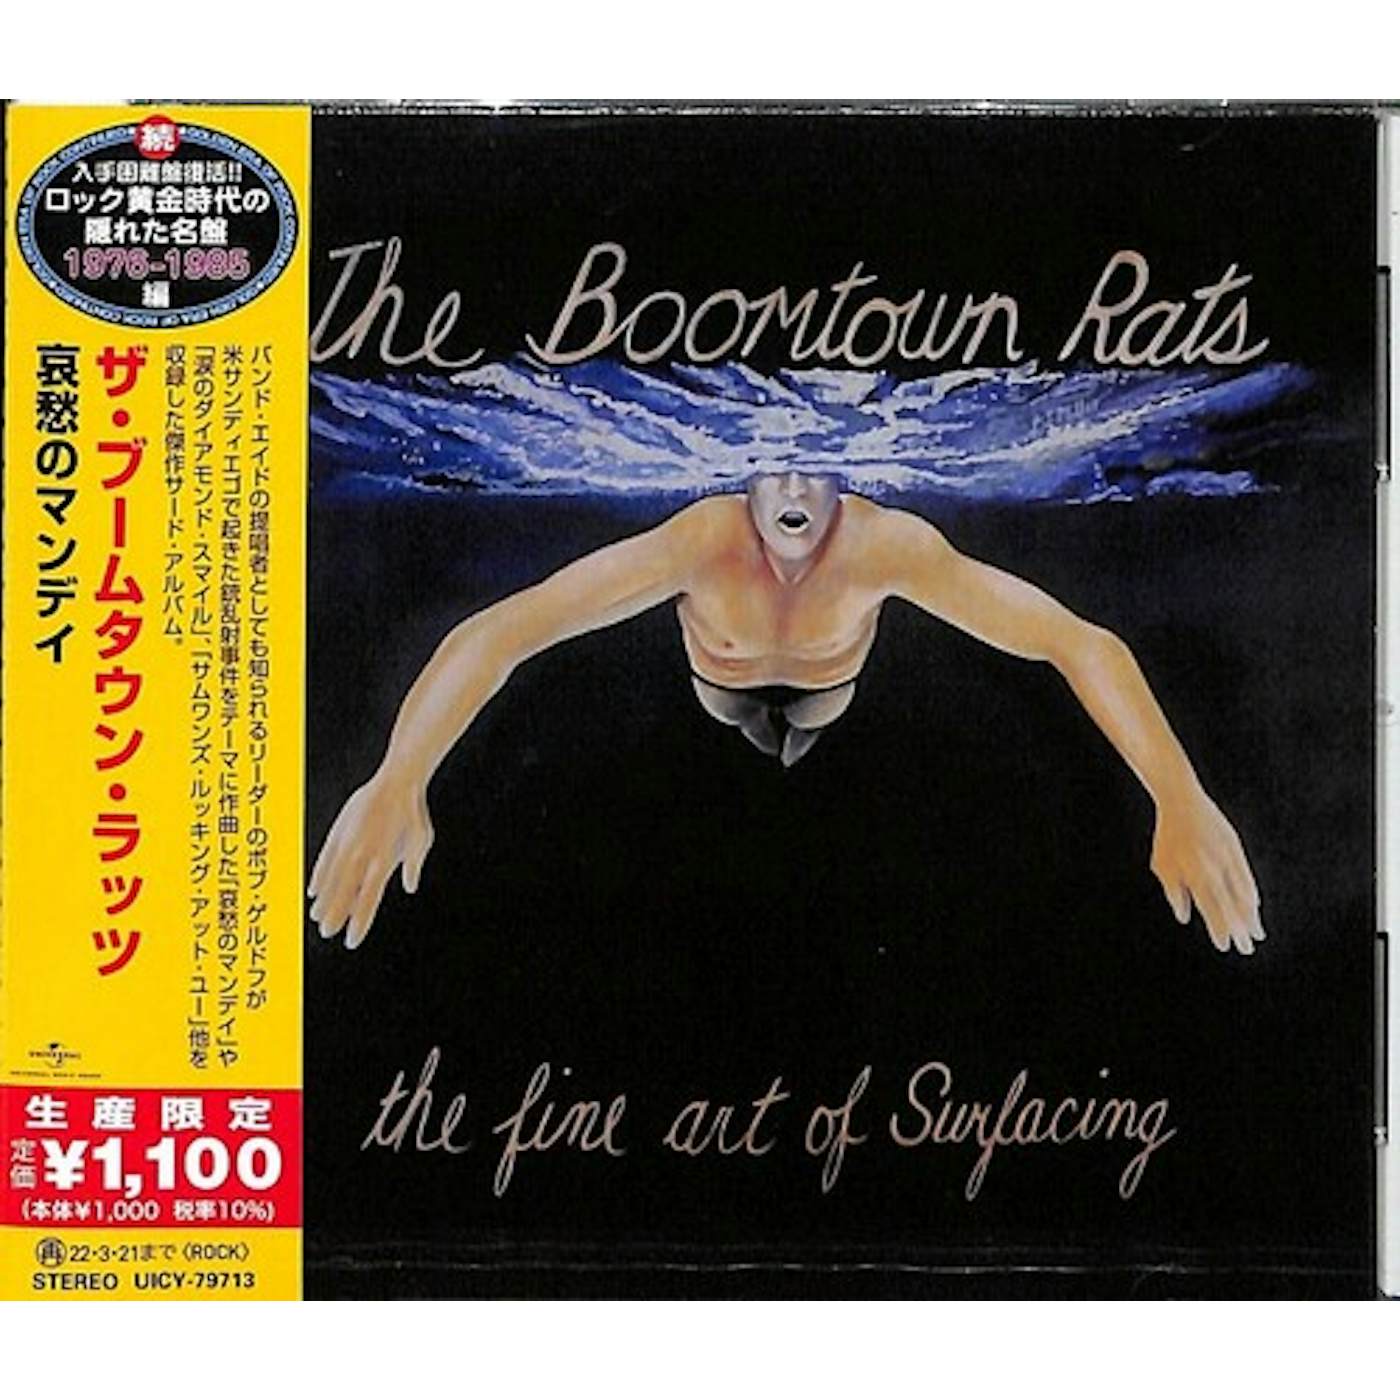 The Boomtown Rats FINE ART OF SURFACING CD